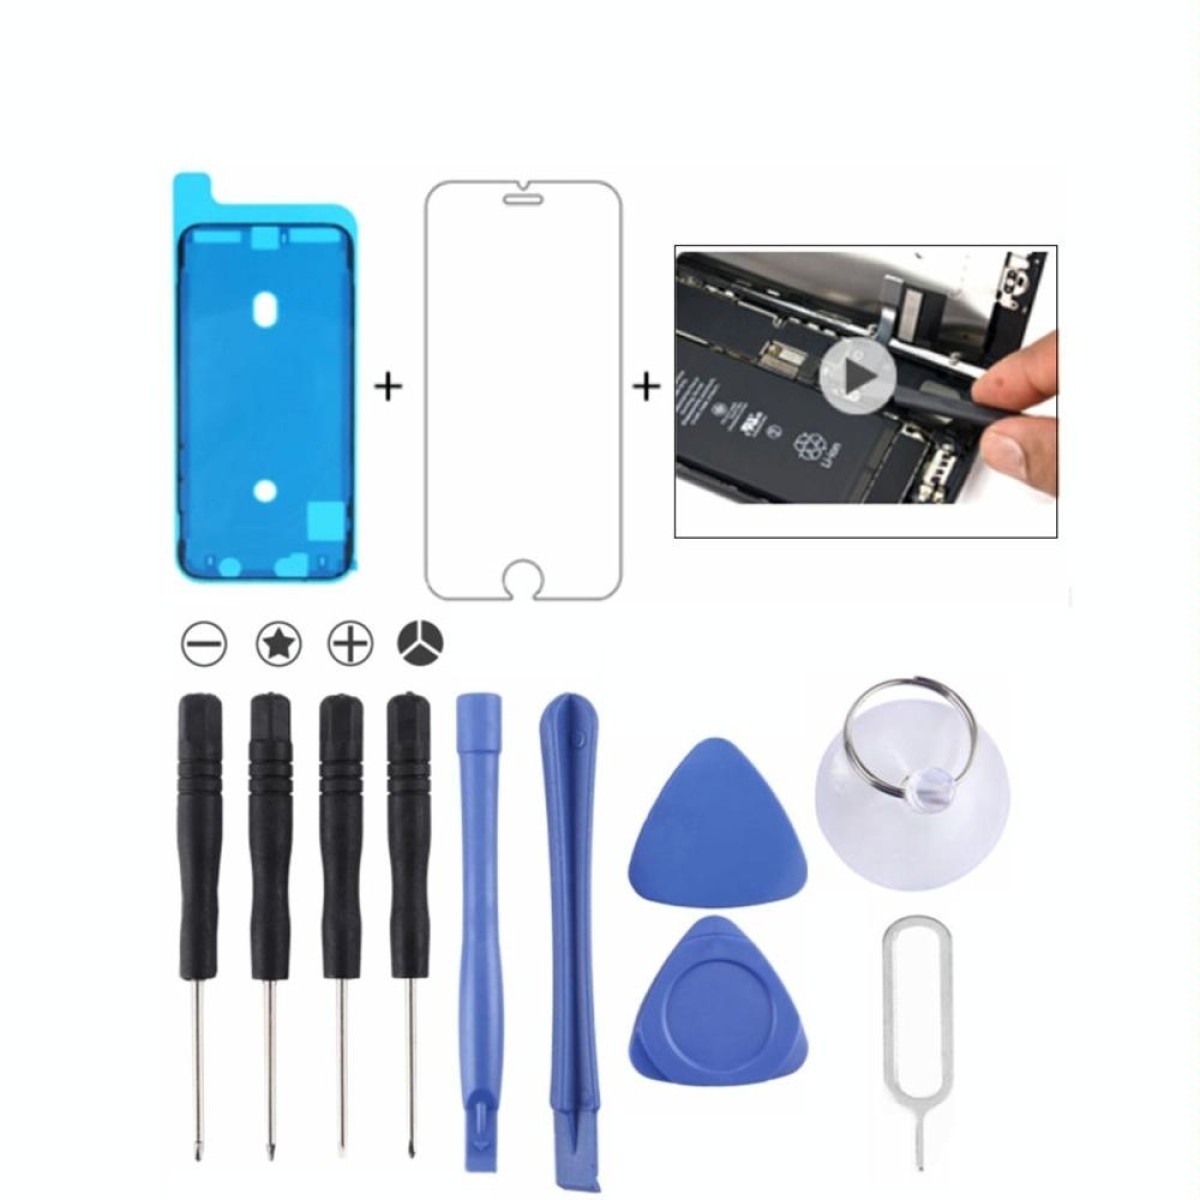 12 in 1 Repair Kits & Gifts (4 x Screwdriver + 2 x Teardown Rods + 2 x Triangle on Thick Slices + 1 x Eject Pin + 1 x Chuck + 1 x Waterproof Sticker + 1 x Tempered Glass)